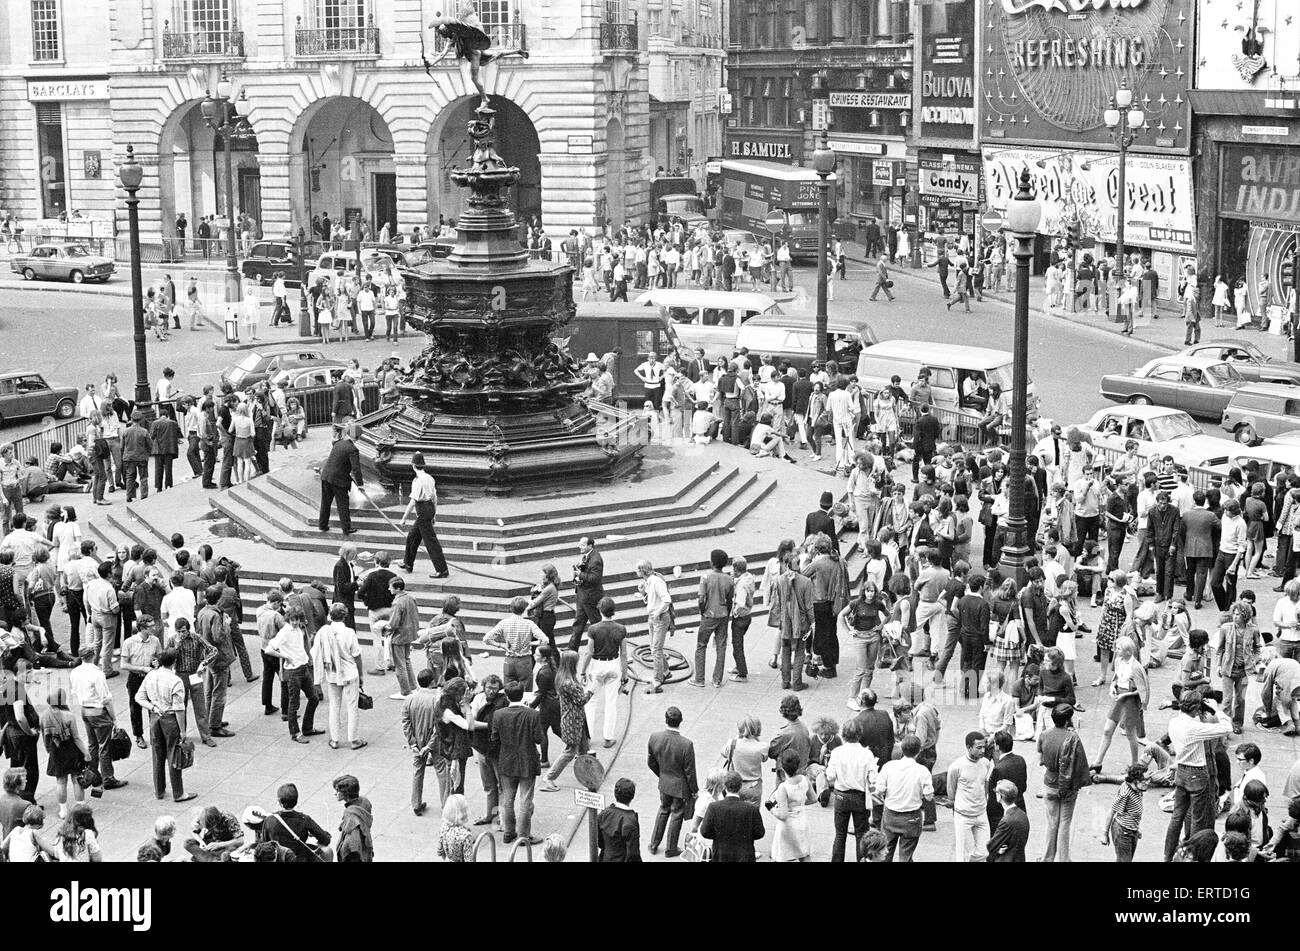 Touristen in Piccadilly, London, 10. August 1969. Stockfoto